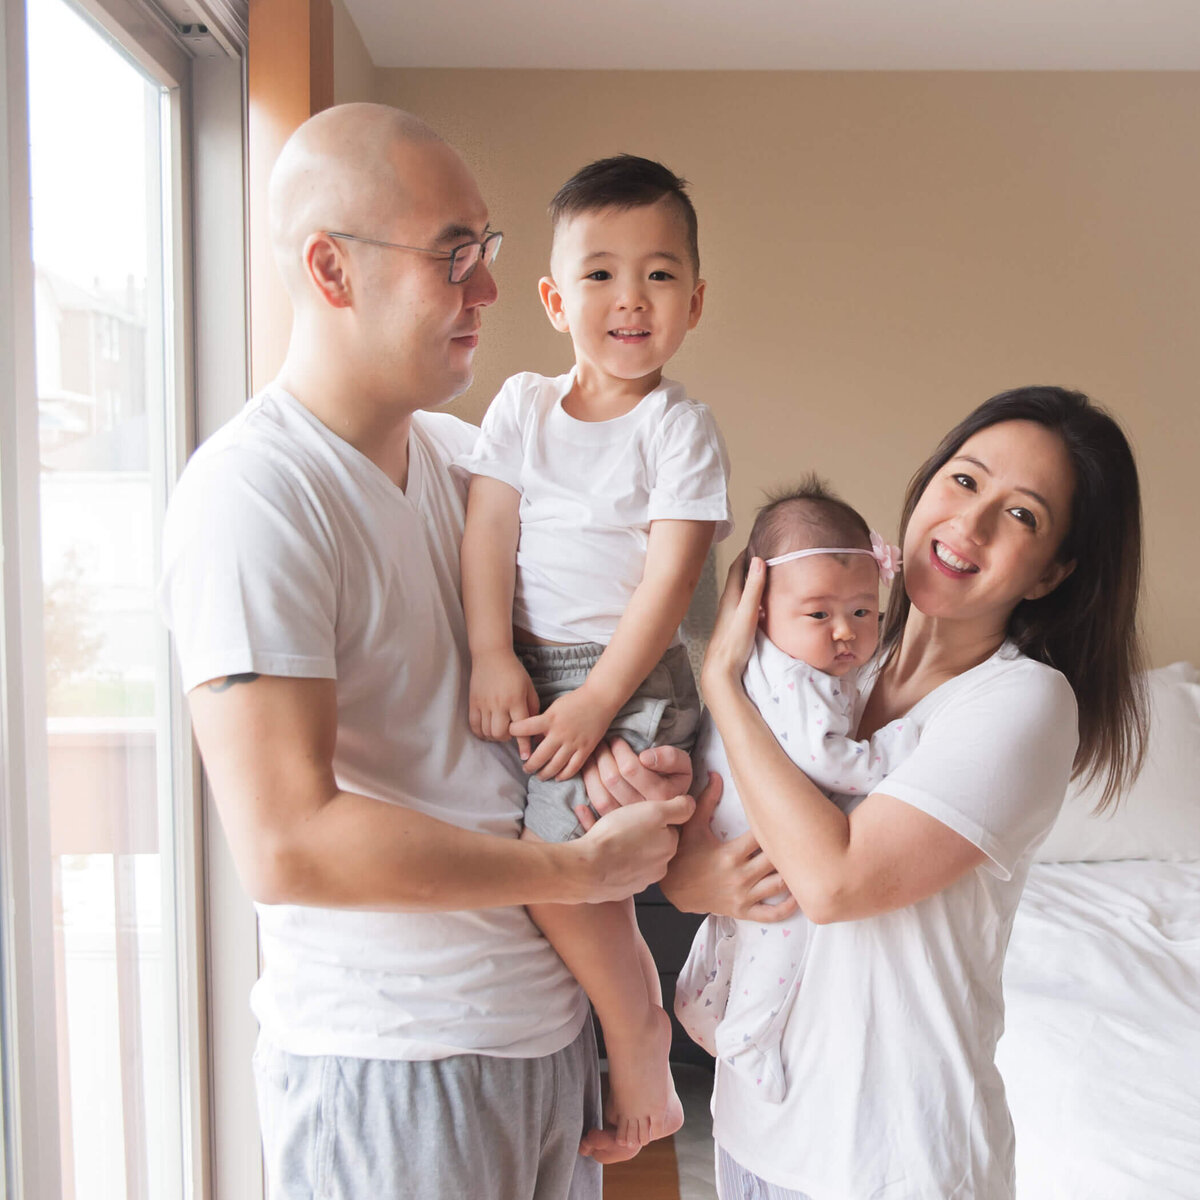 happy family in white and light grey together casually in master bedroom with tan walls